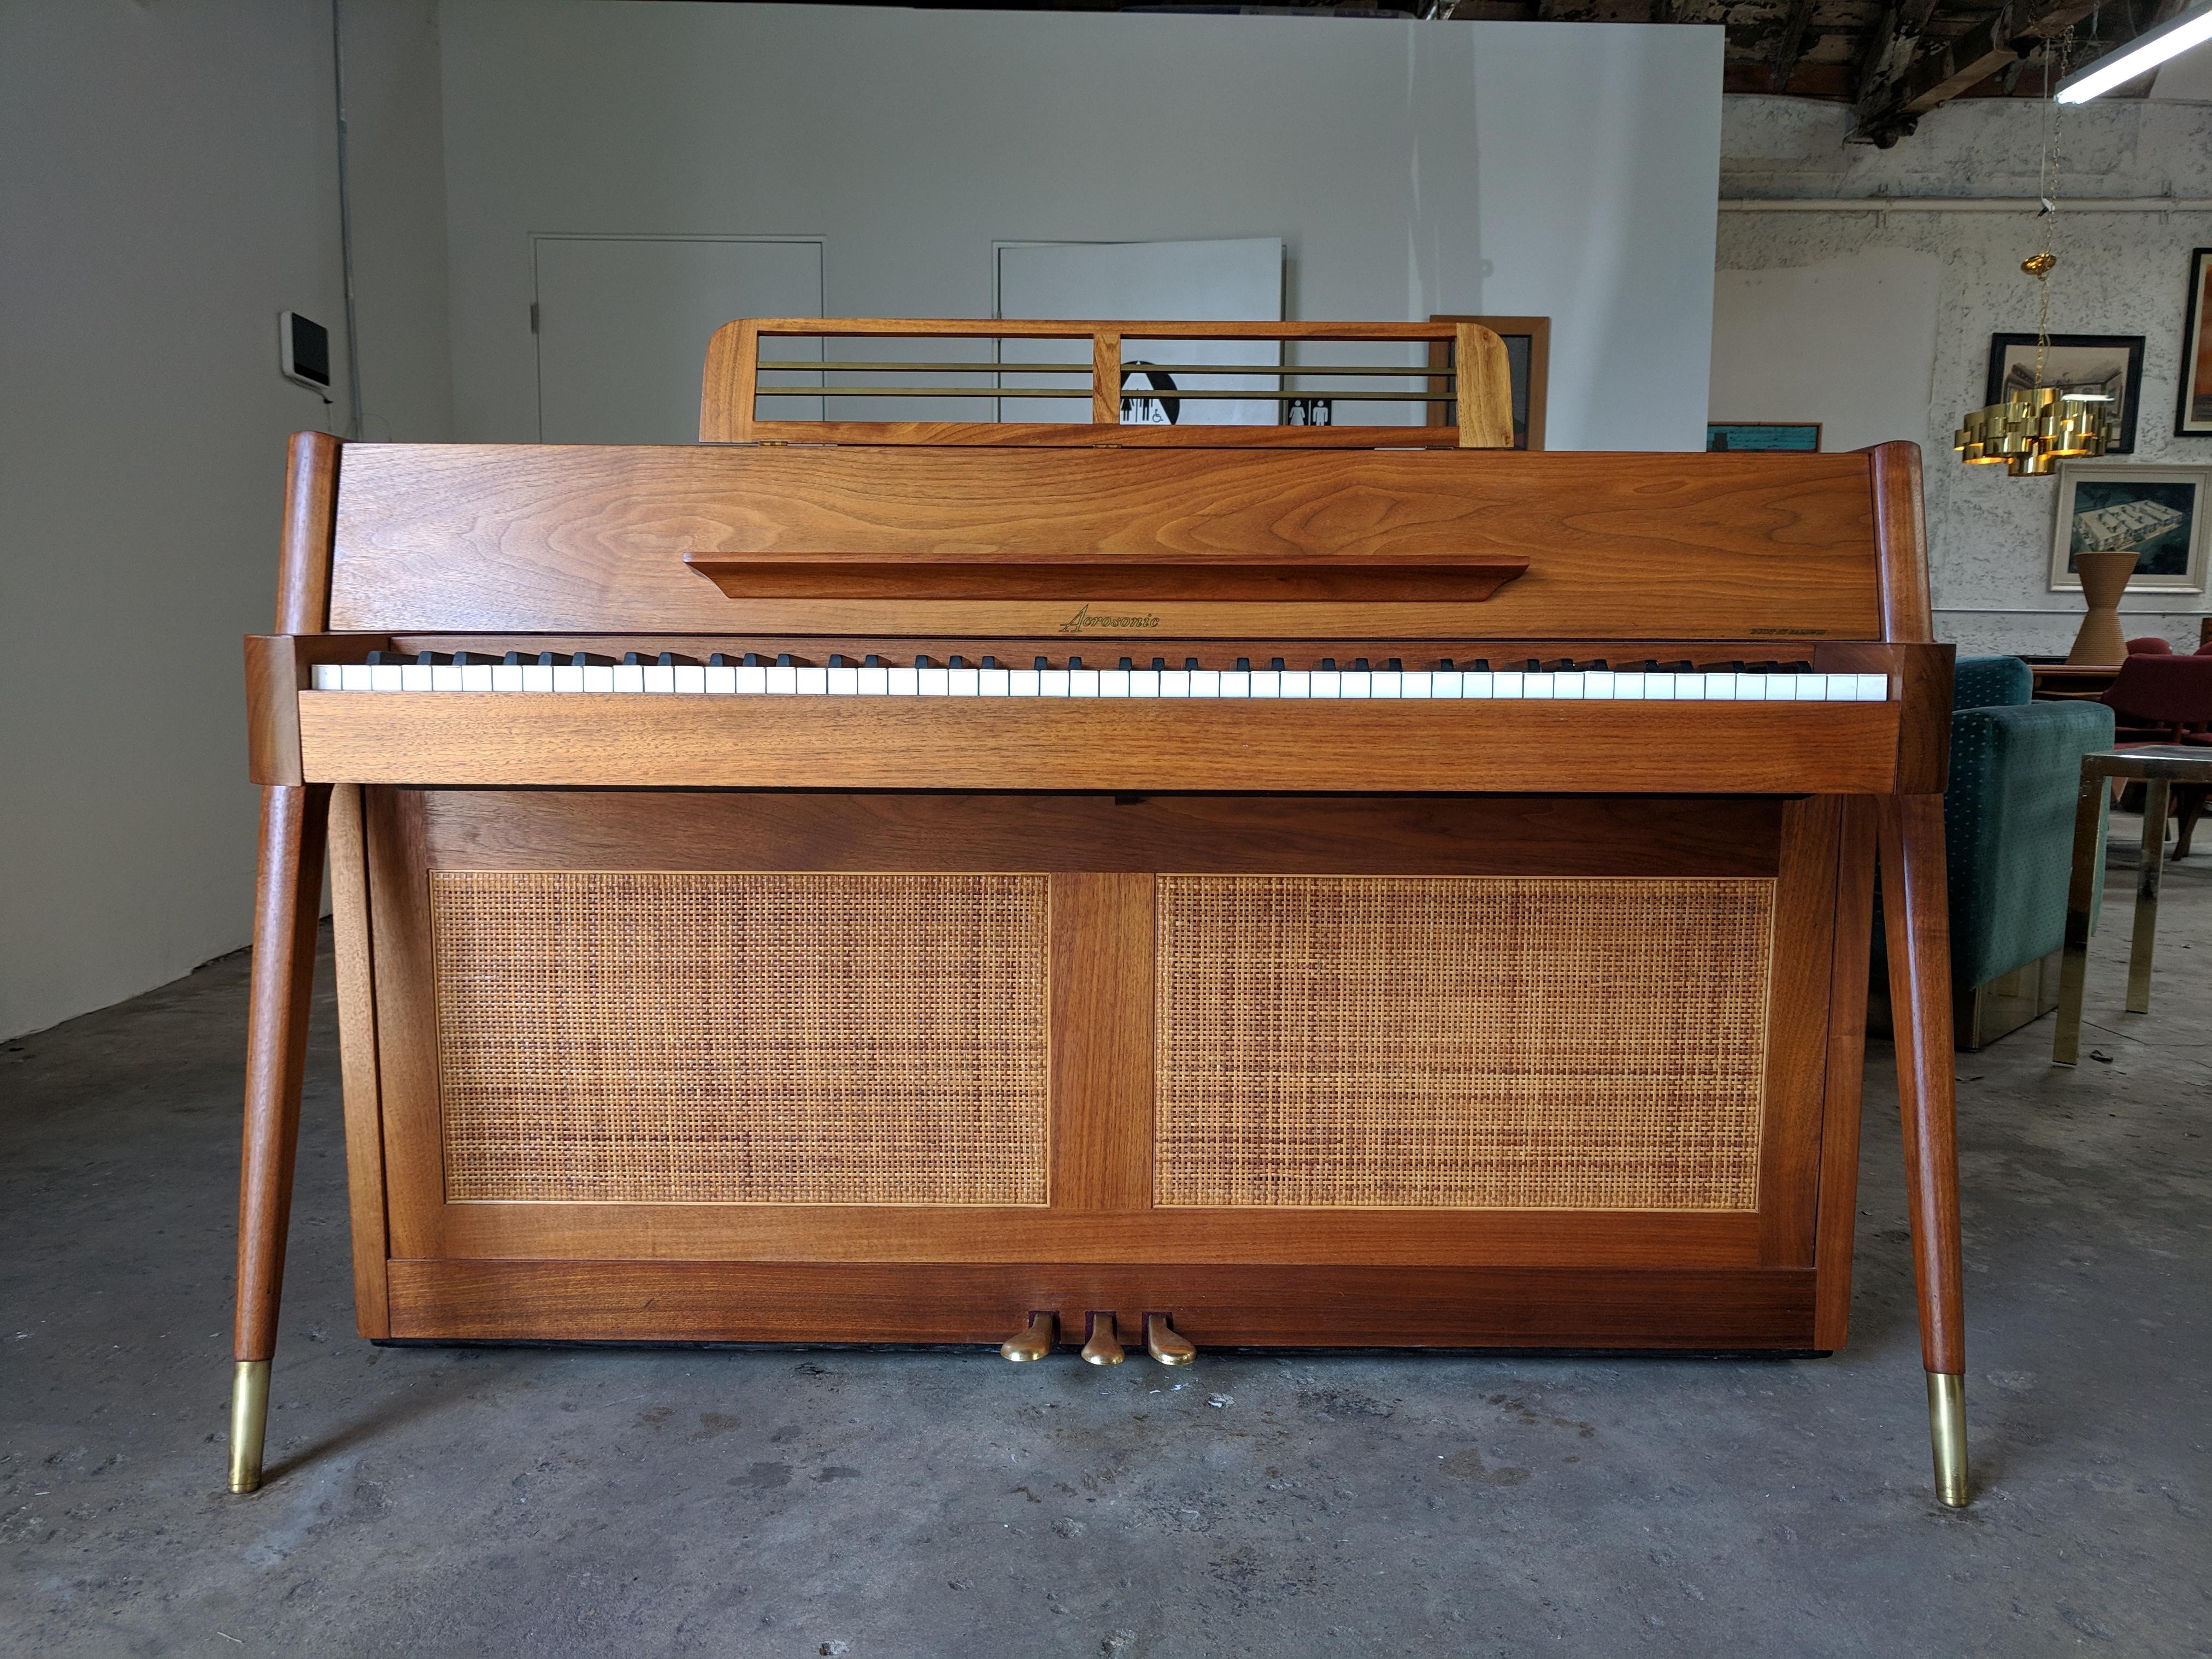 Beautiful grain. Walnut with brass tipped angled legs. Cane on the front and the back. Includes original care instructions and 10 year warranty pamphlet, which has since expired. Sounds great. Has a rare bench. Some of the keys have notes written on